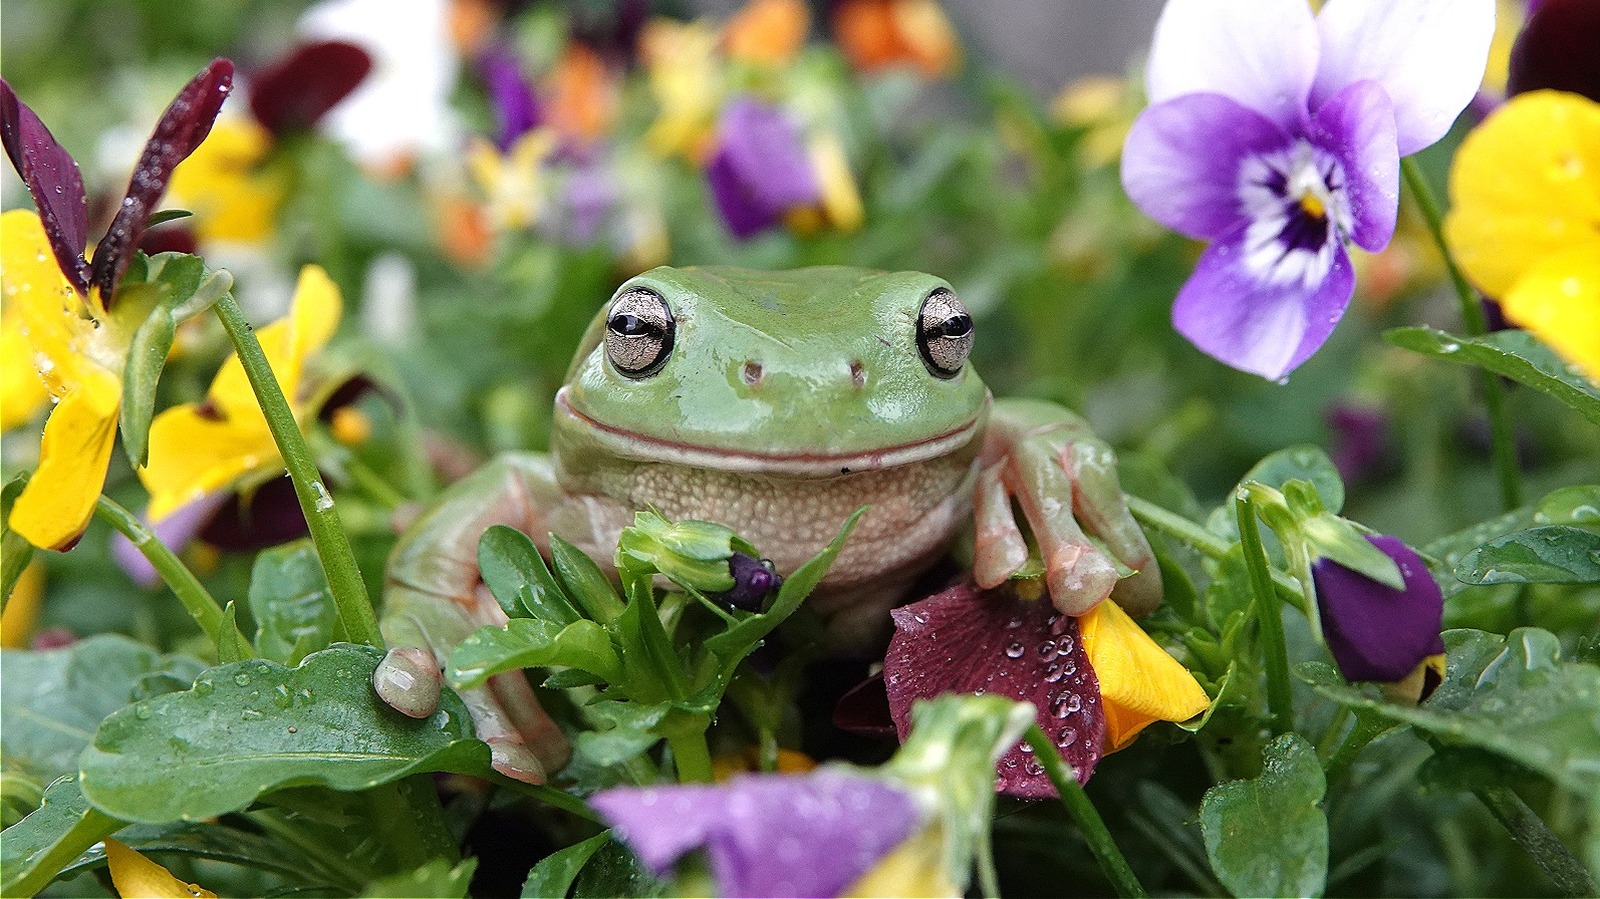 using flower frogs - which are not actually frogs - MY FRENCH